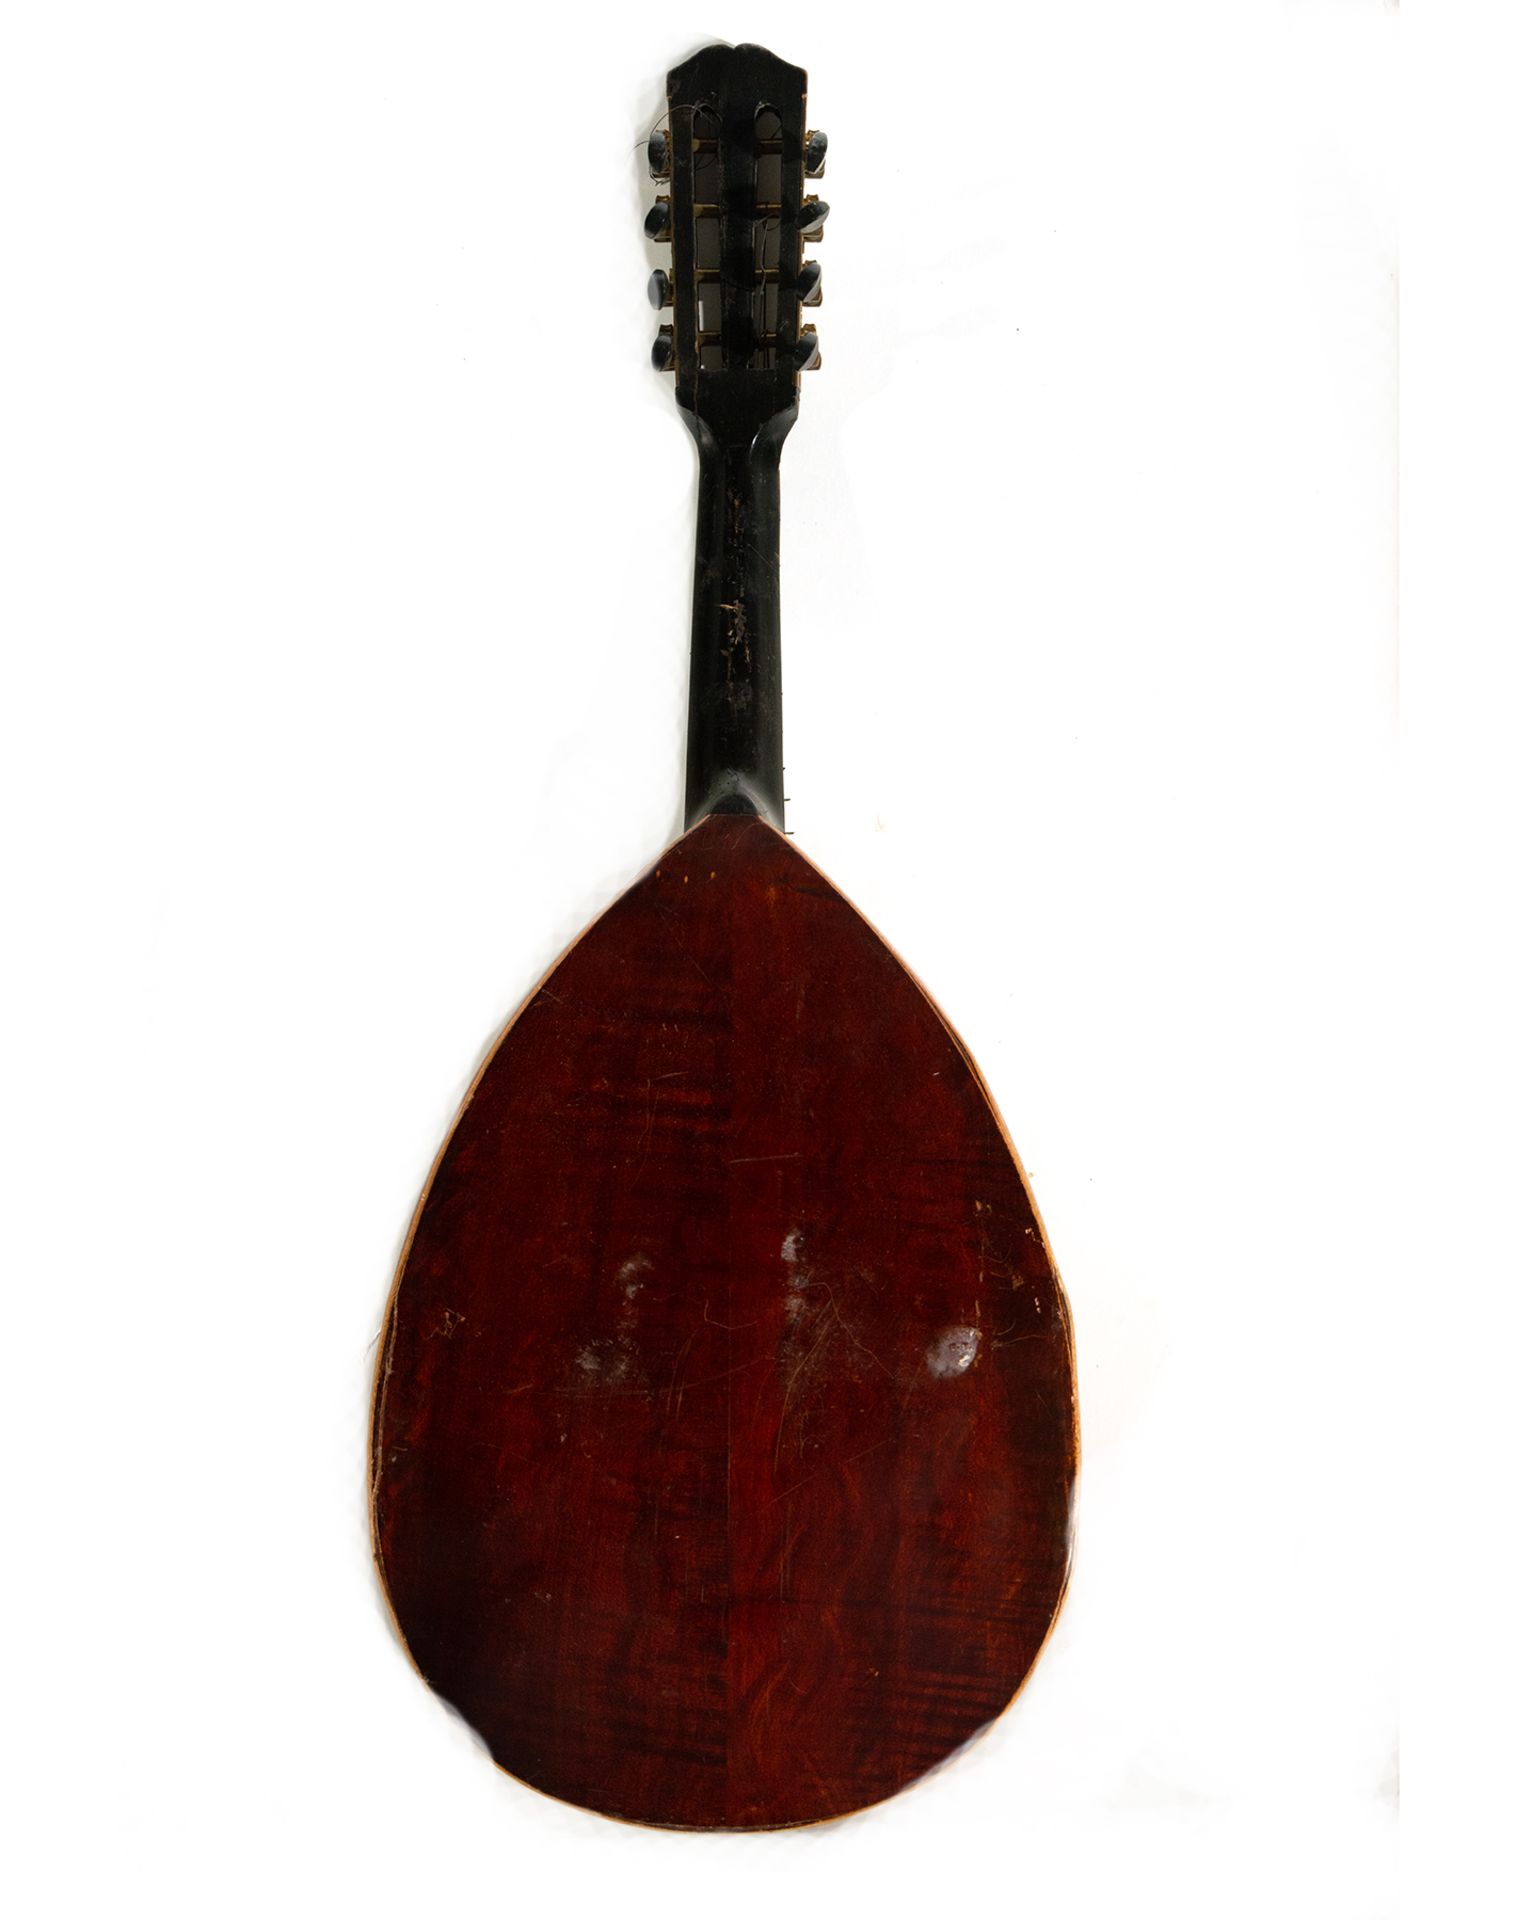 Lute in marquetry of fruit and mother-of-pearl, XIX - XX century - Image 2 of 2